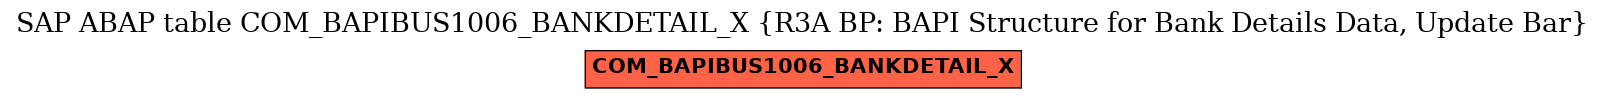 E-R Diagram for table COM_BAPIBUS1006_BANKDETAIL_X (R3A BP: BAPI Structure for Bank Details Data, Update Bar)